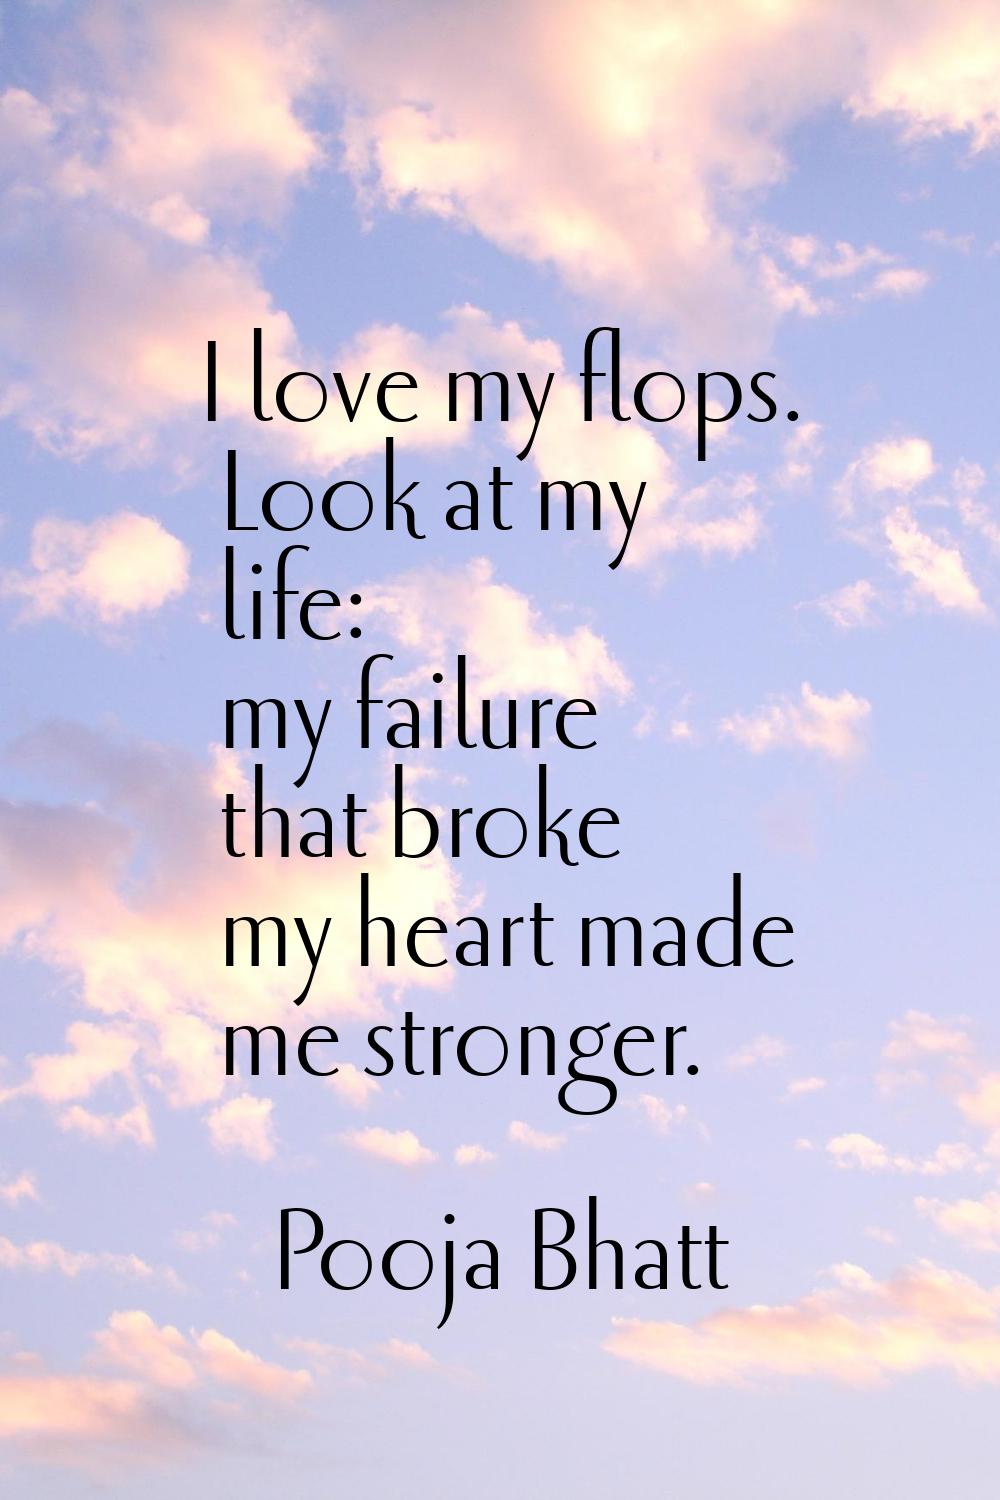 I love my flops. Look at my life: my failure that broke my heart made me stronger.